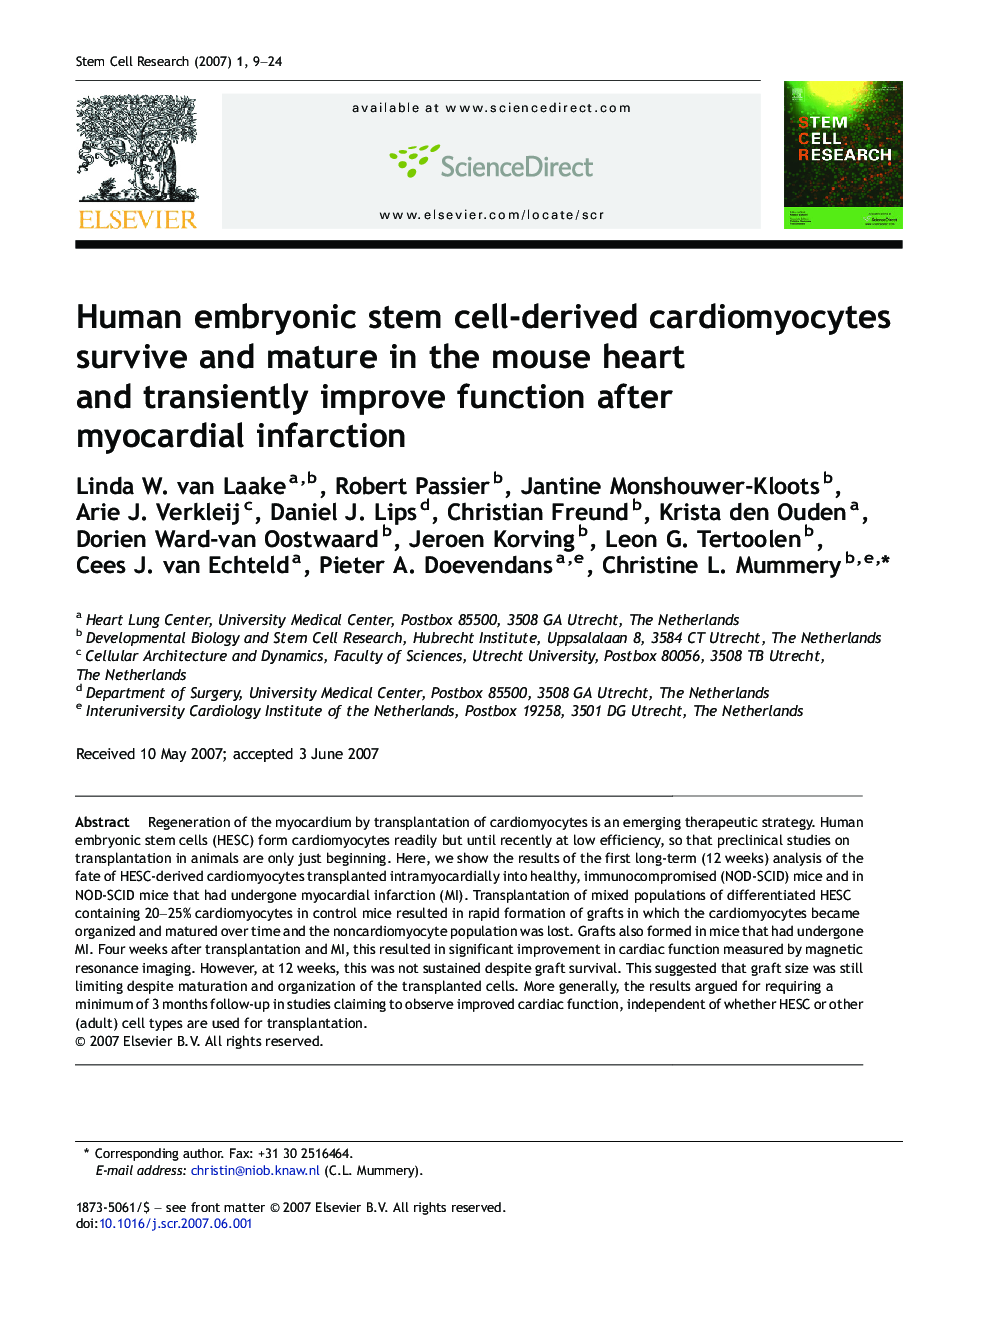 Human embryonic stem cell-derived cardiomyocytes survive and mature in the mouse heart and transiently improve function after myocardial infarction